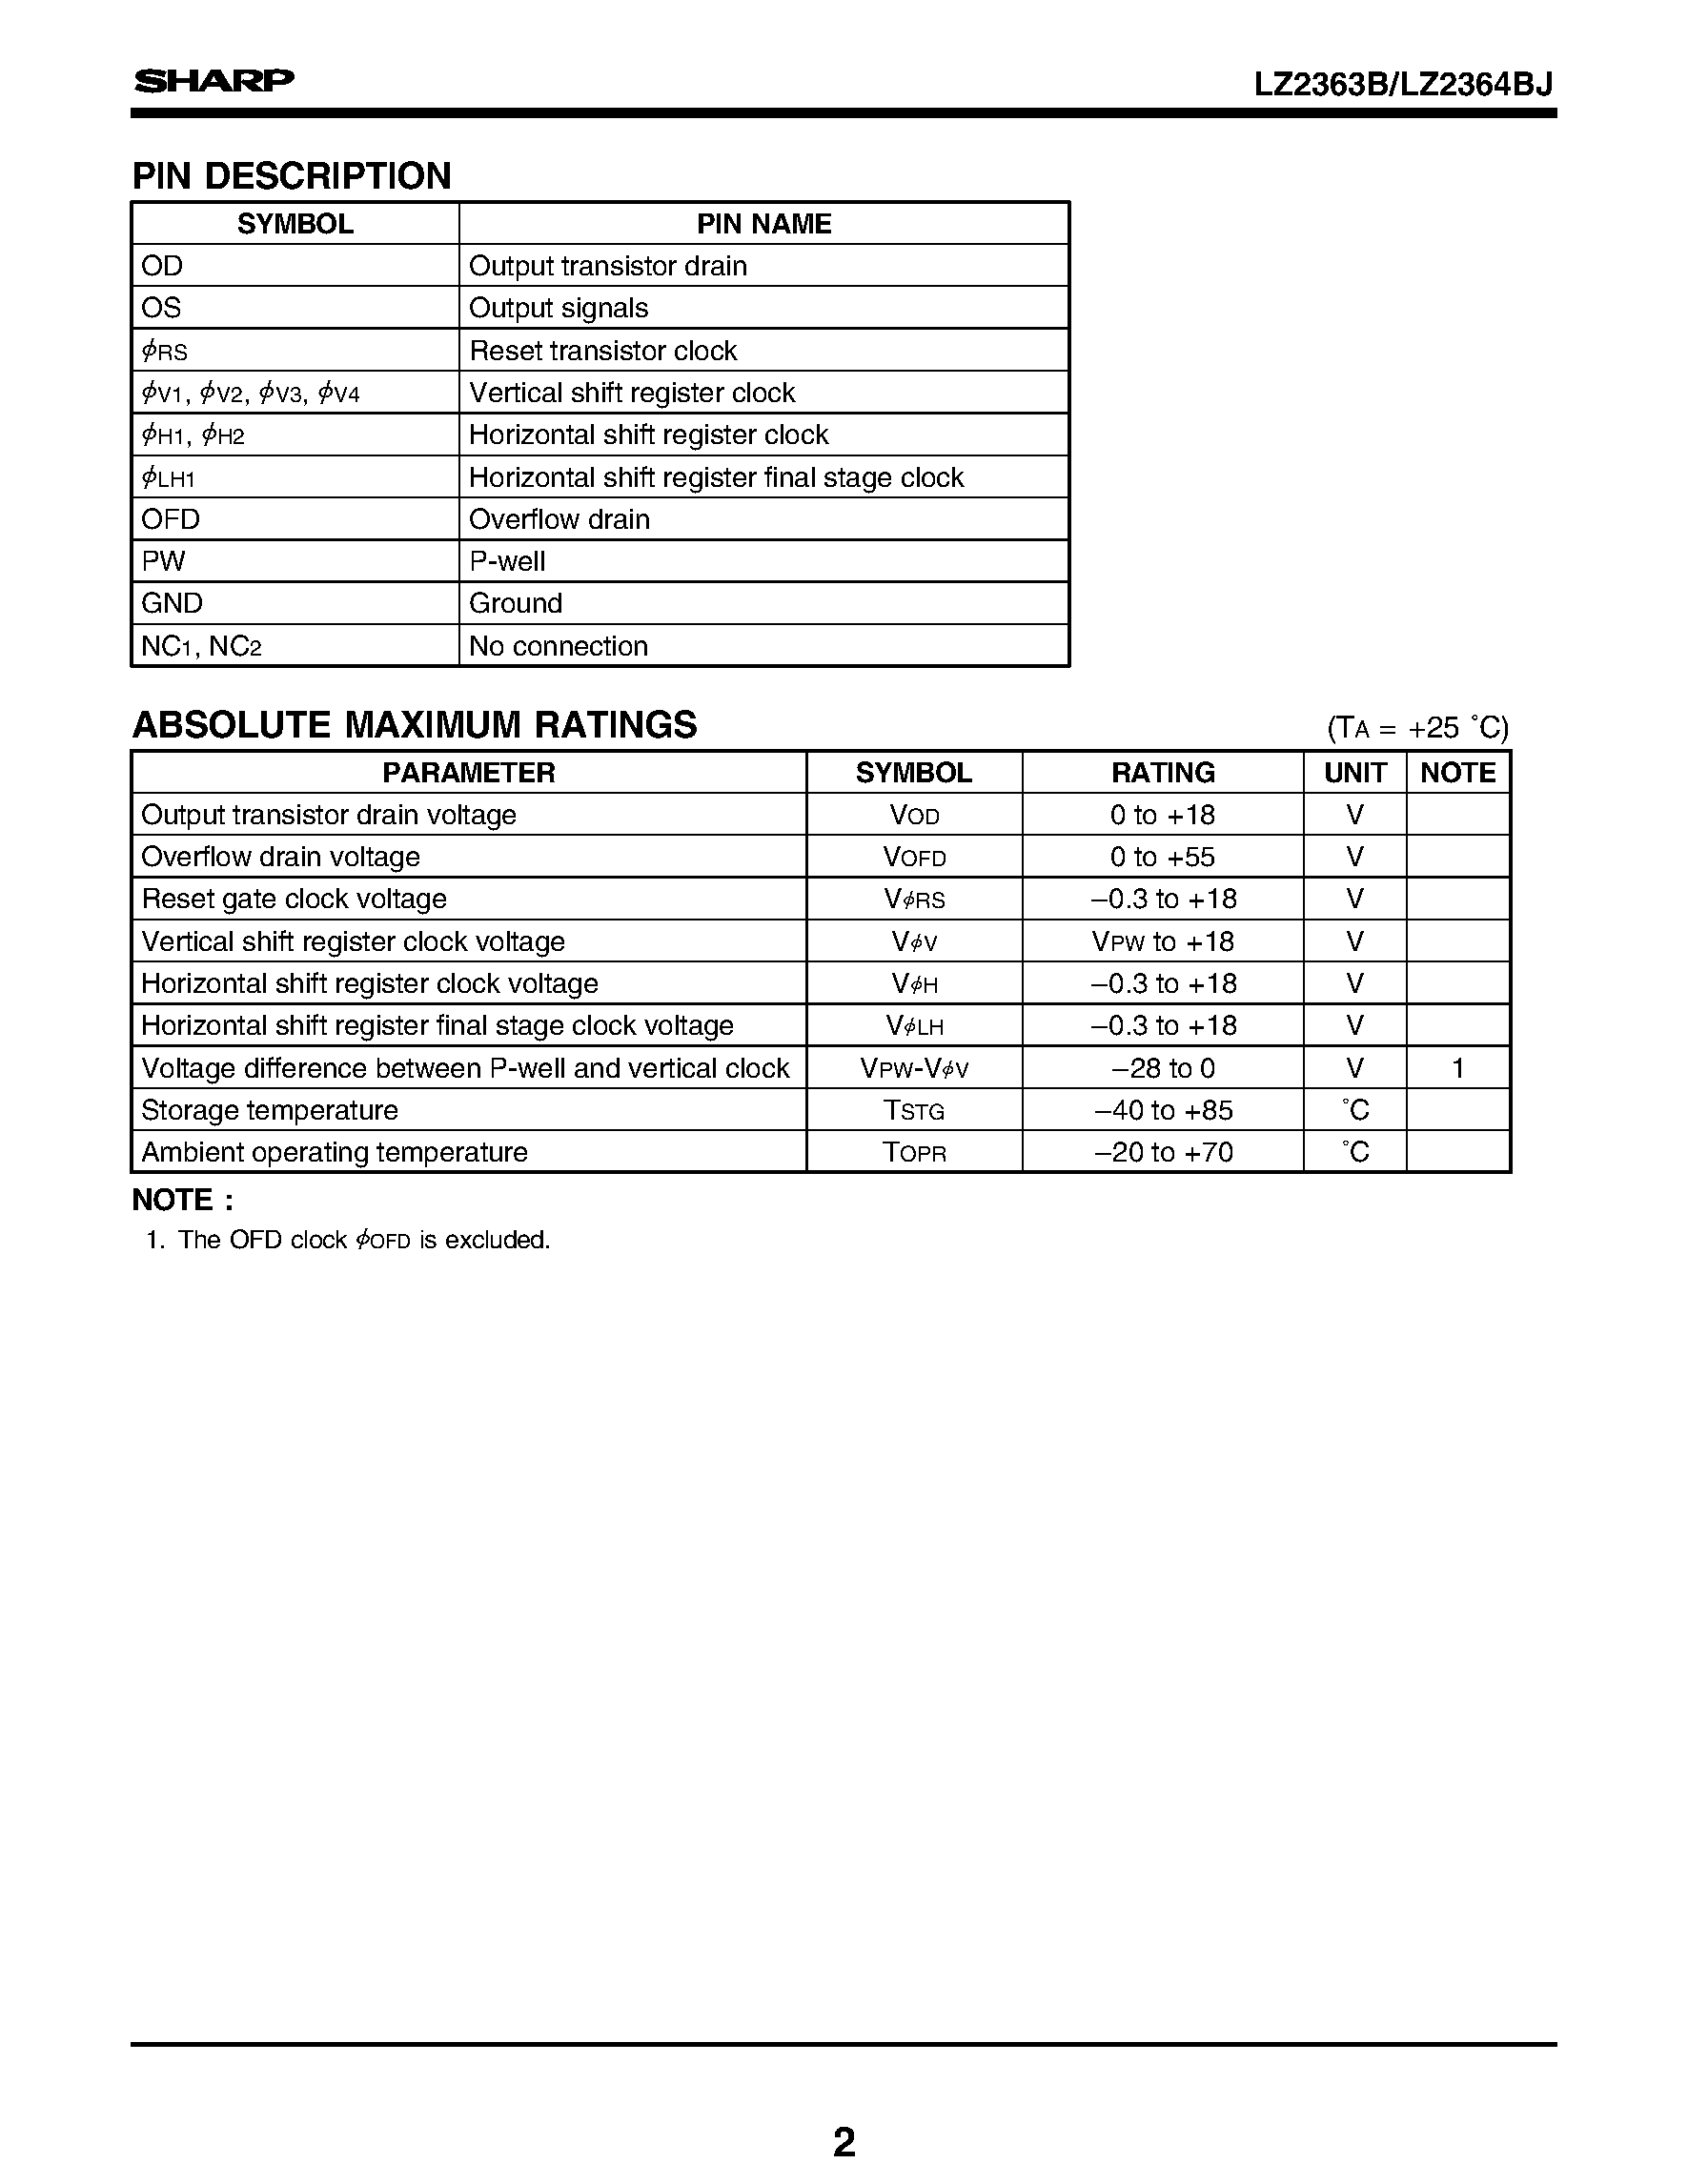 Datasheet LZ2363B - 1/3-type CCD Area Sensors with 470 k Pixels page 2